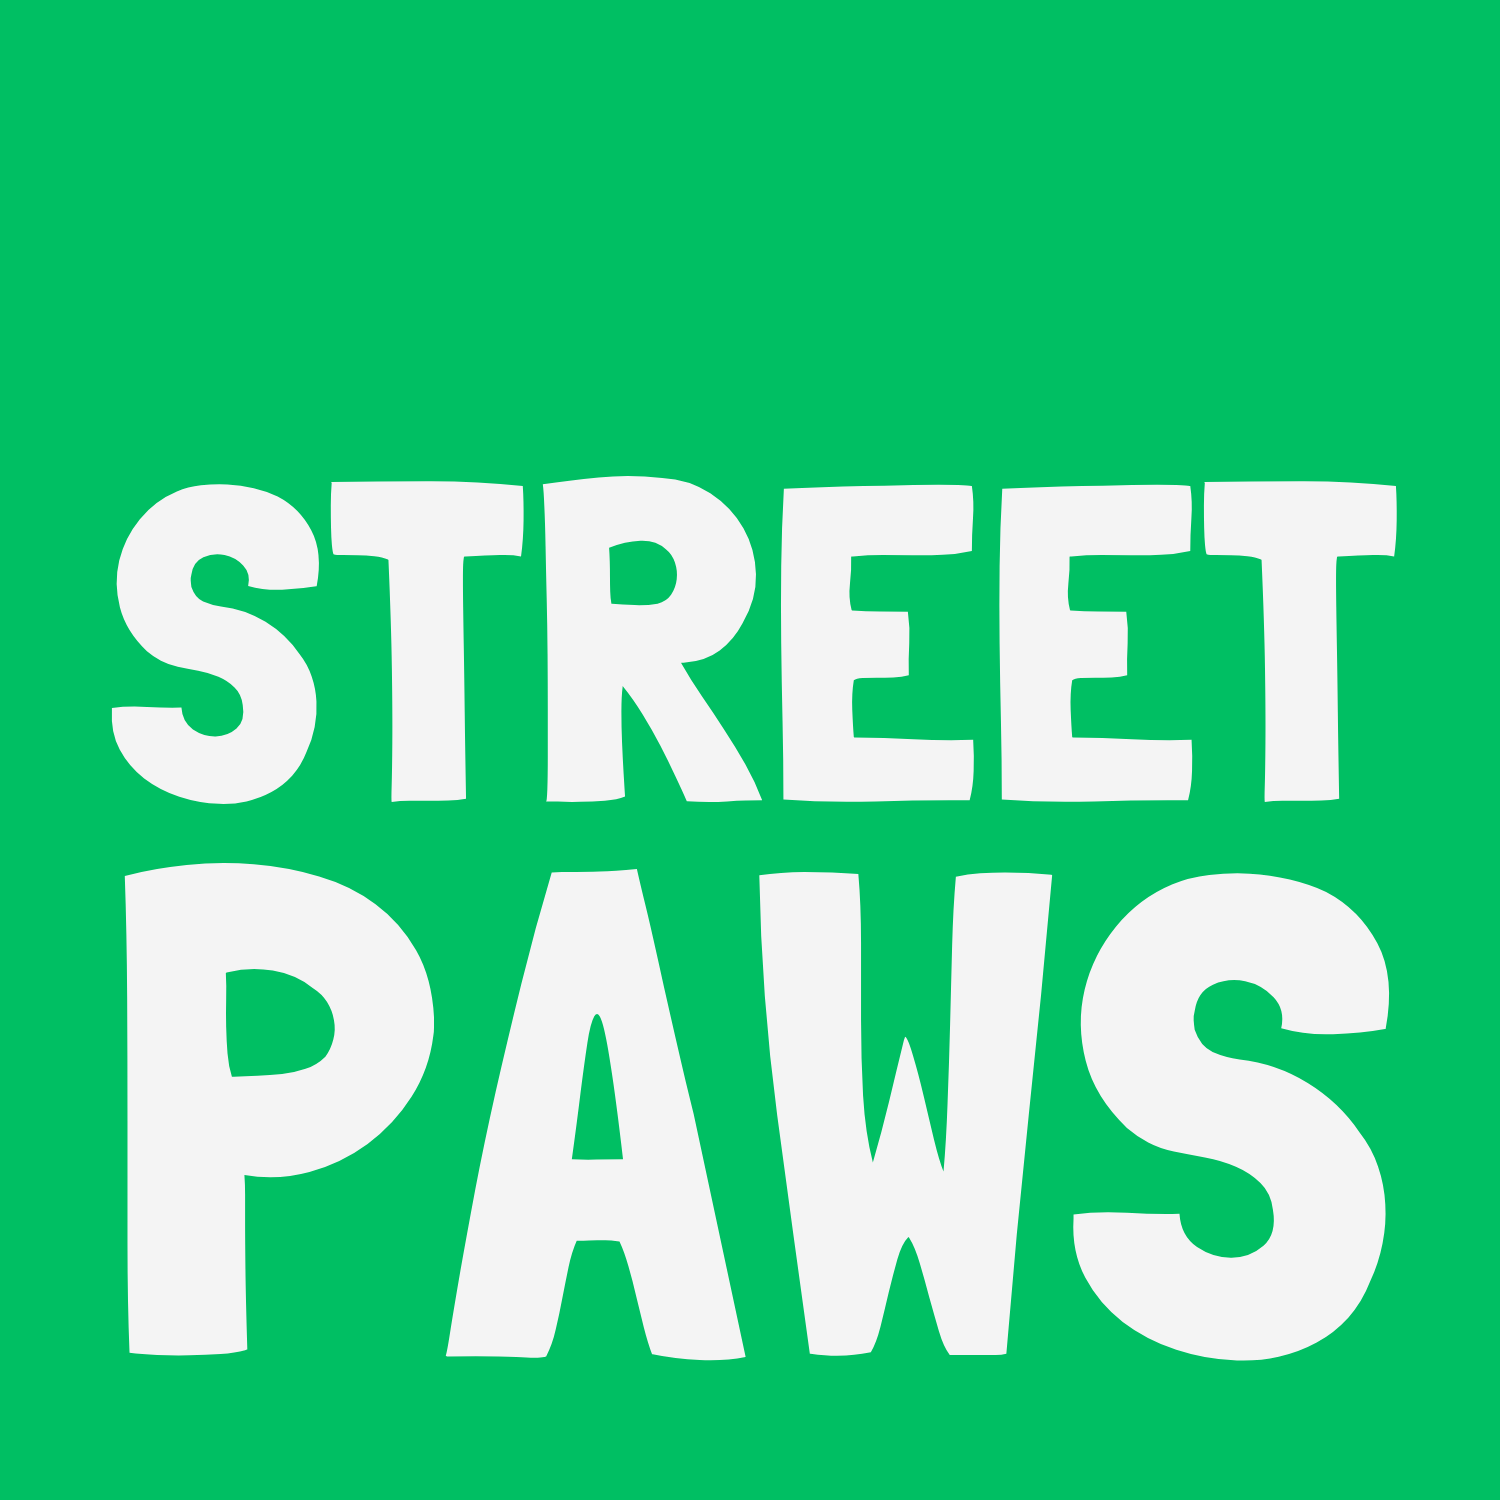 Street Paws logo in white writing on a green background